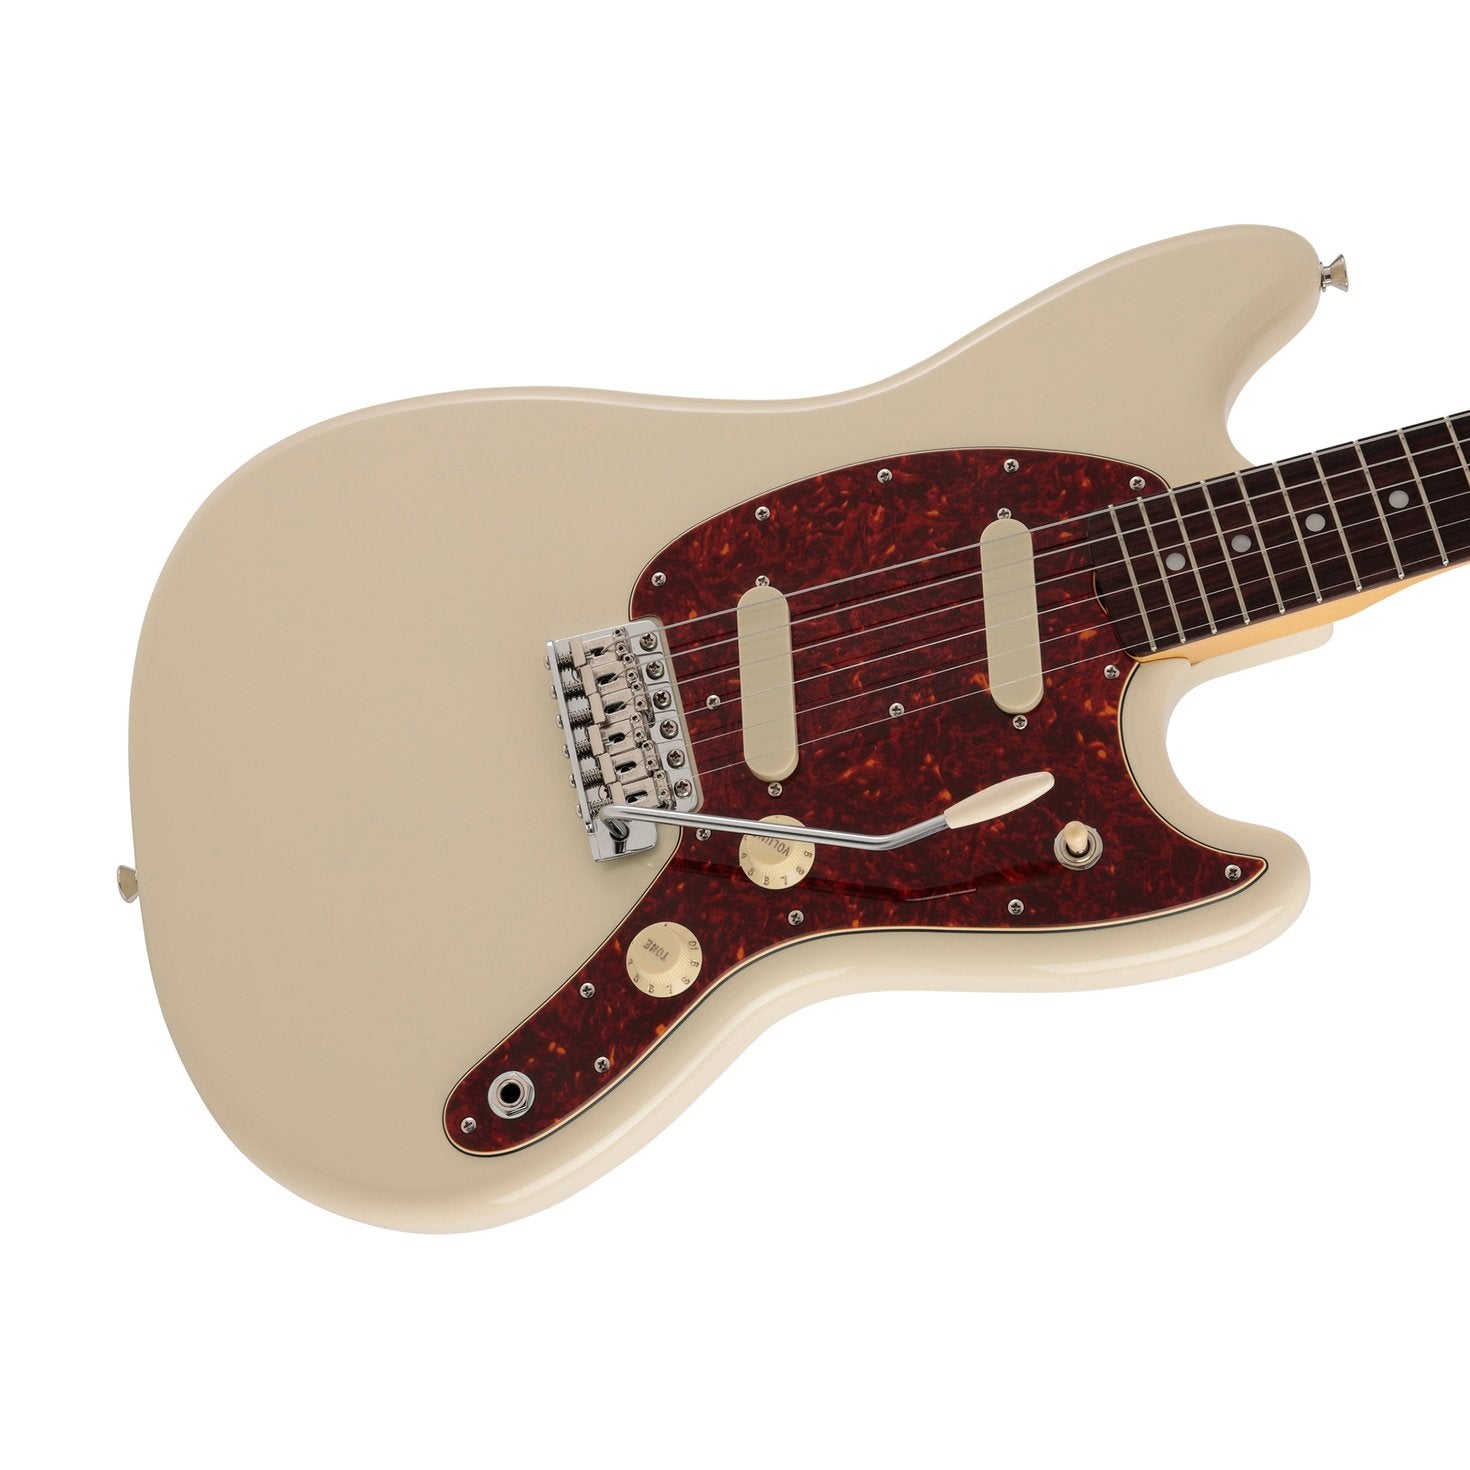 Fender Japan CHAR Signature Mustang Electric Guitar, RW FB, Olympic White, FENDER, ELECTRIC GUITAR, fender-electric-guitar-f03-565-2600-305, ZOSO MUSIC SDN BHD